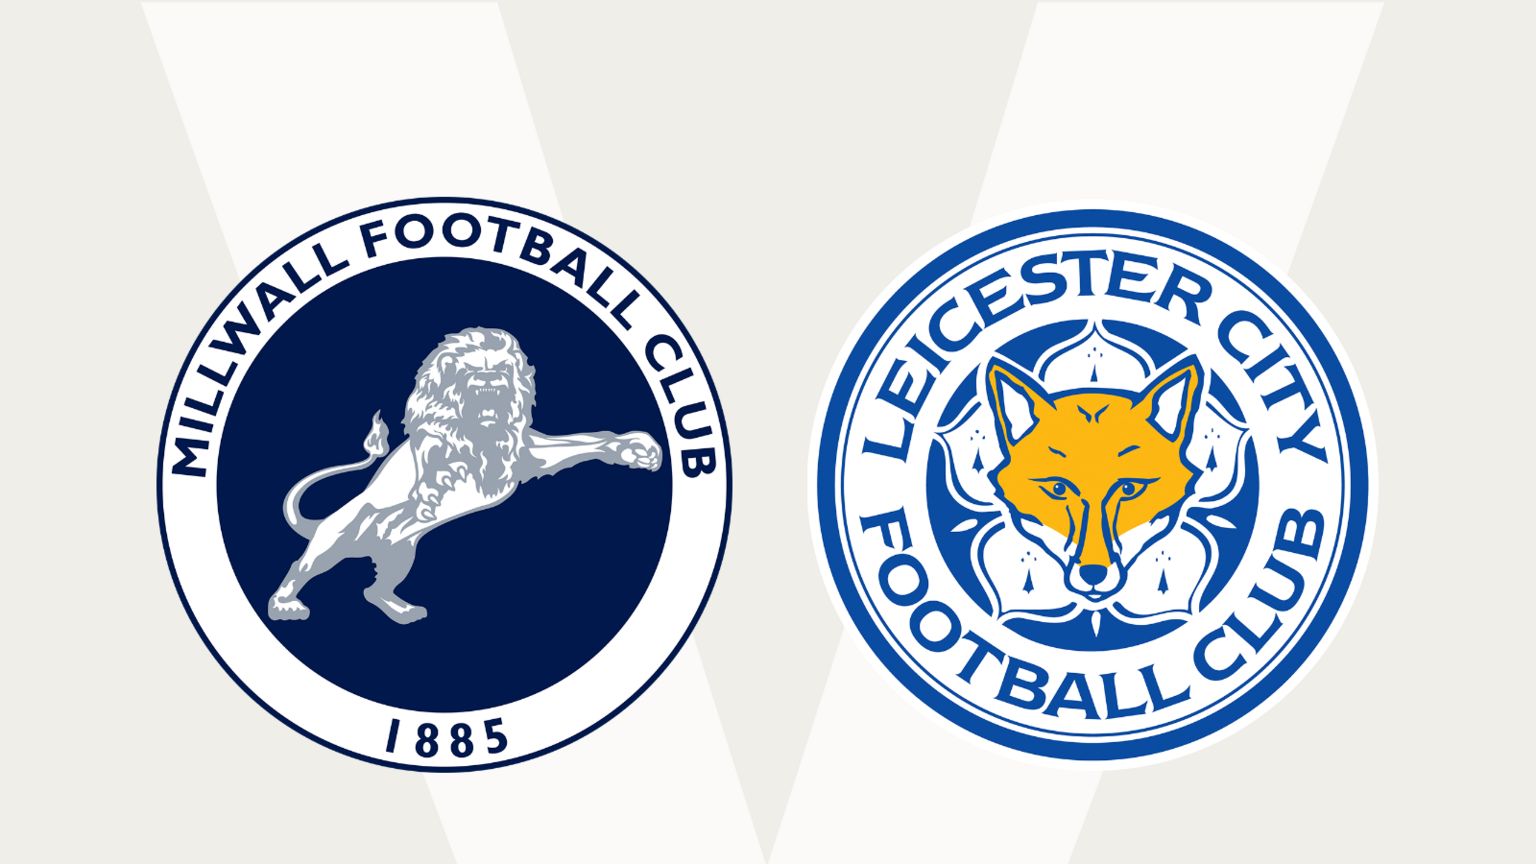 Millwall and Leicester City club badges